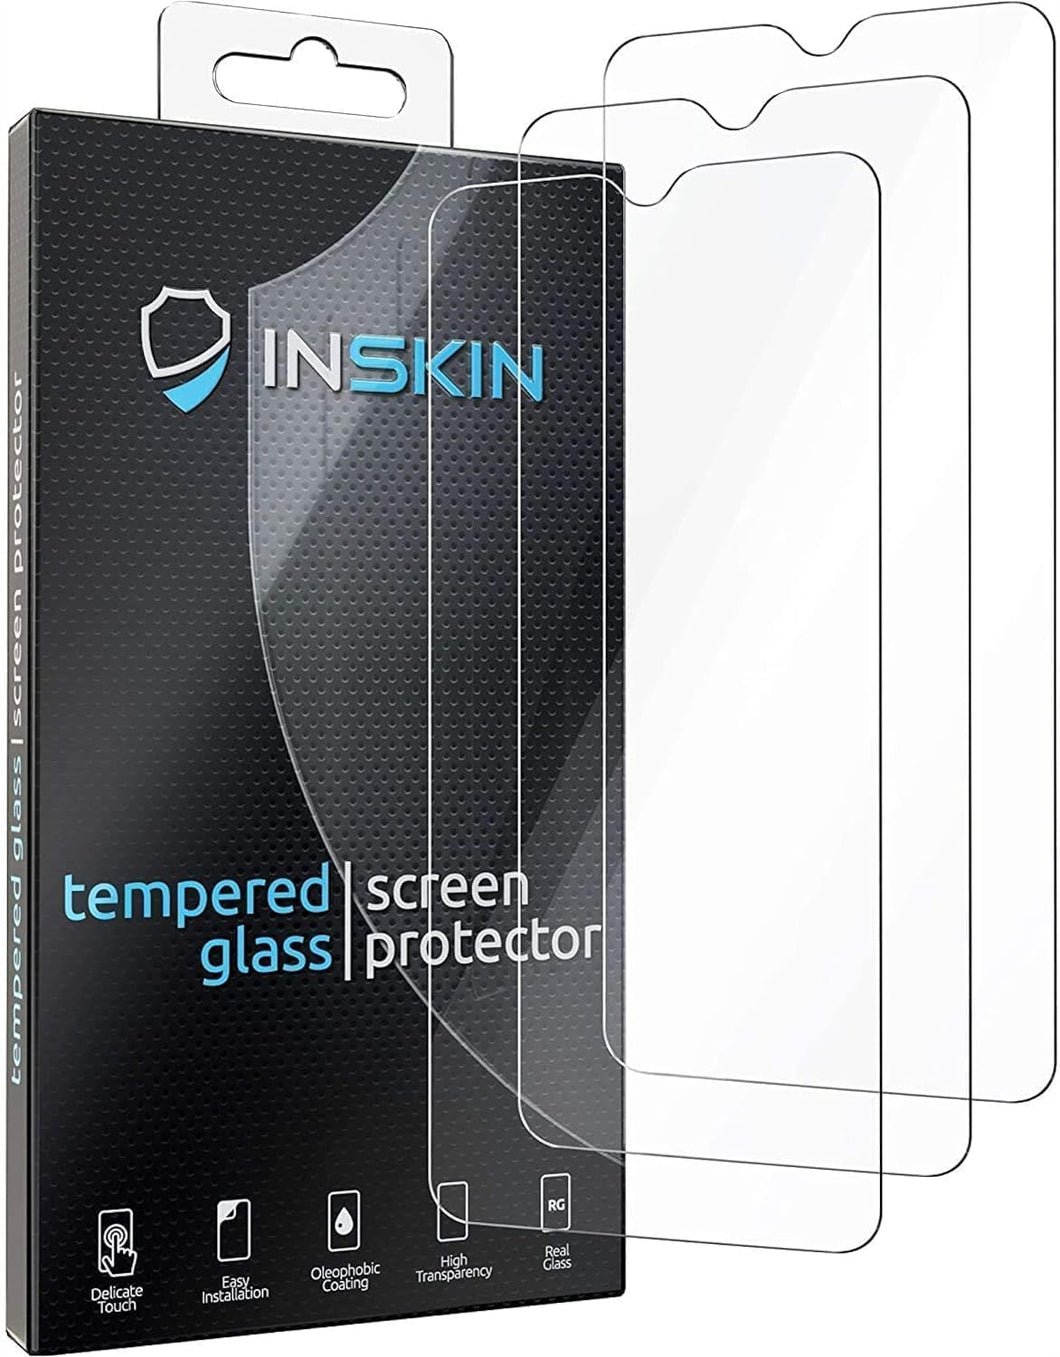 Inskin Tempered Glass Screen Protector, fits LG K41S 6.55 inch [2020] - 3-Pack, HD Clear, Case-Friendly, 9H Hardness, Anti Scratch, Bubble Free Adhesive